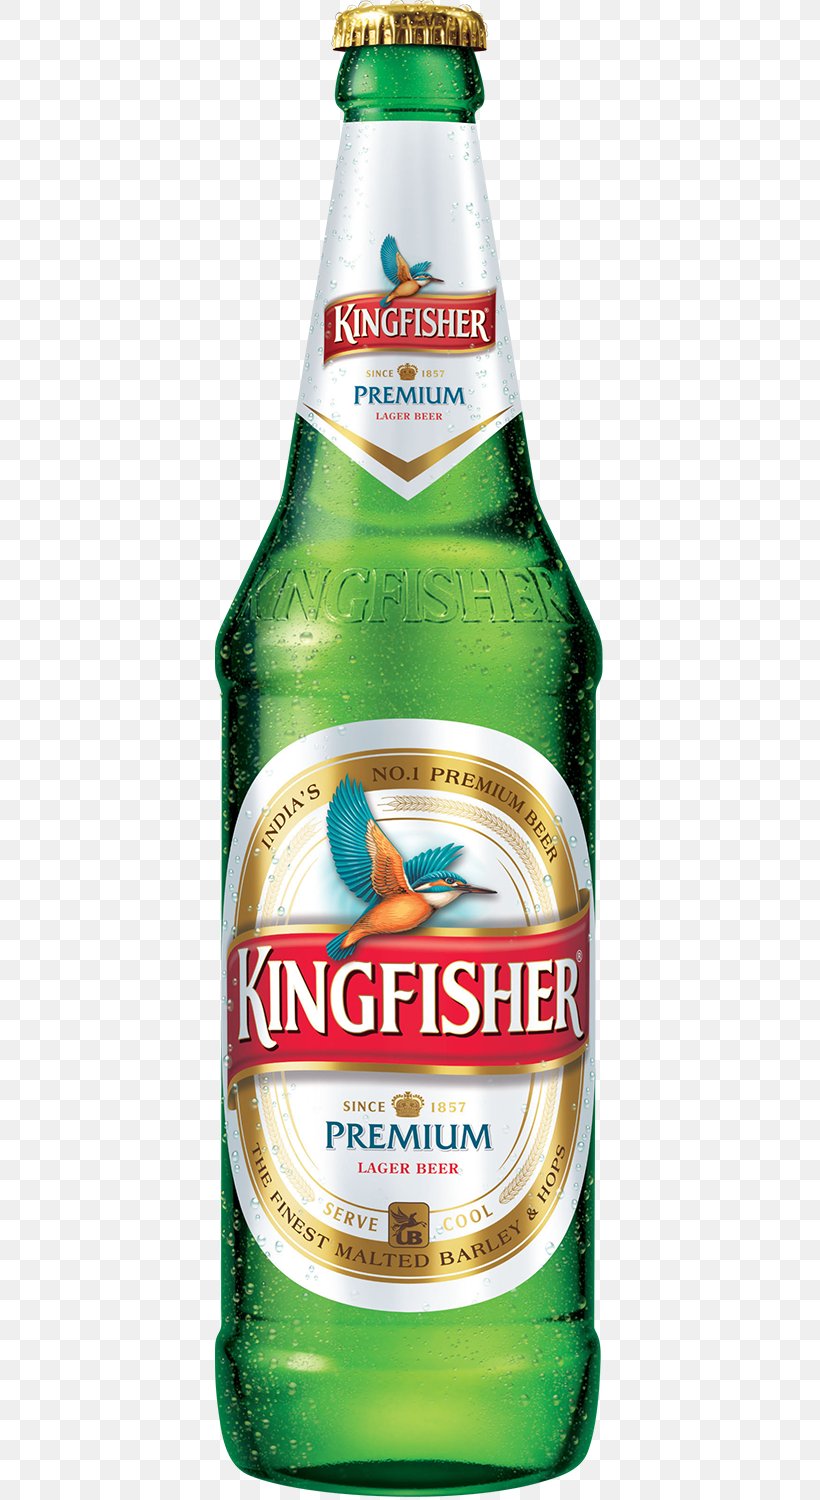 Lager Beer In India Kingfisher Distilled Beverage, PNG, 600x1500px, Lager, Alcohol By Volume, Alcoholic Beverage, Alcoholic Drink, Beer Download Free